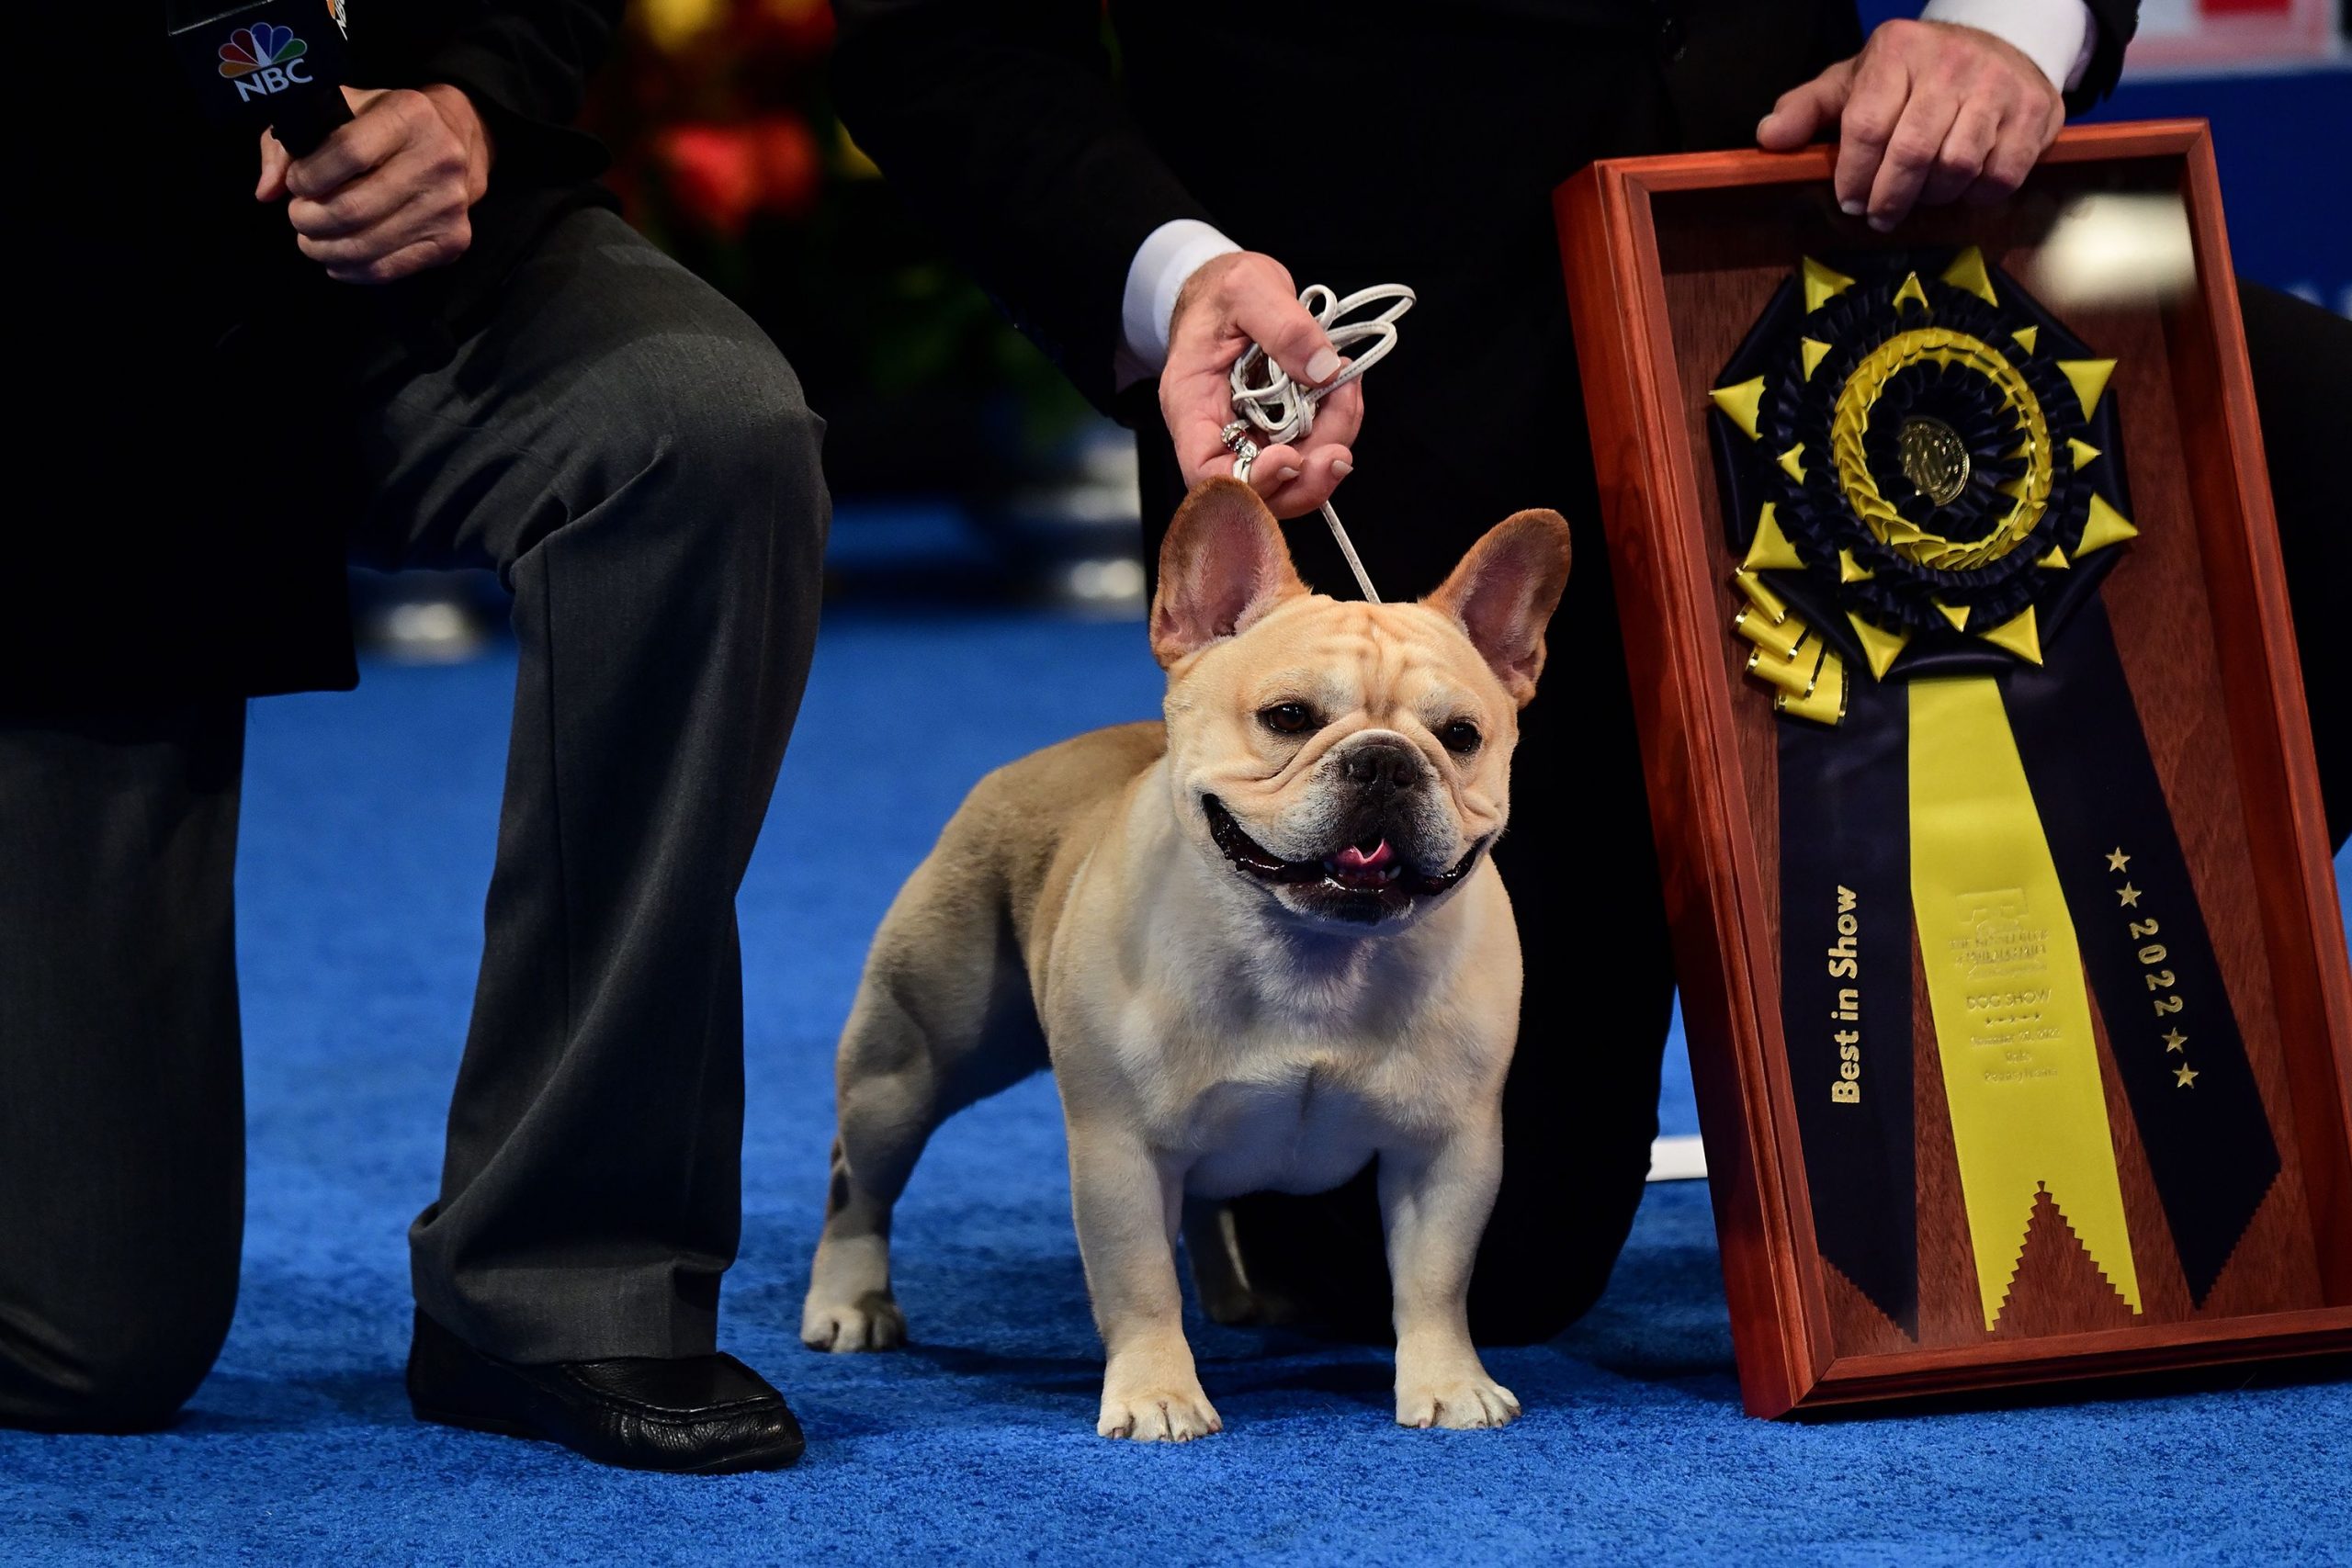 The National Dog Show has now been won by French bulldog Winston.